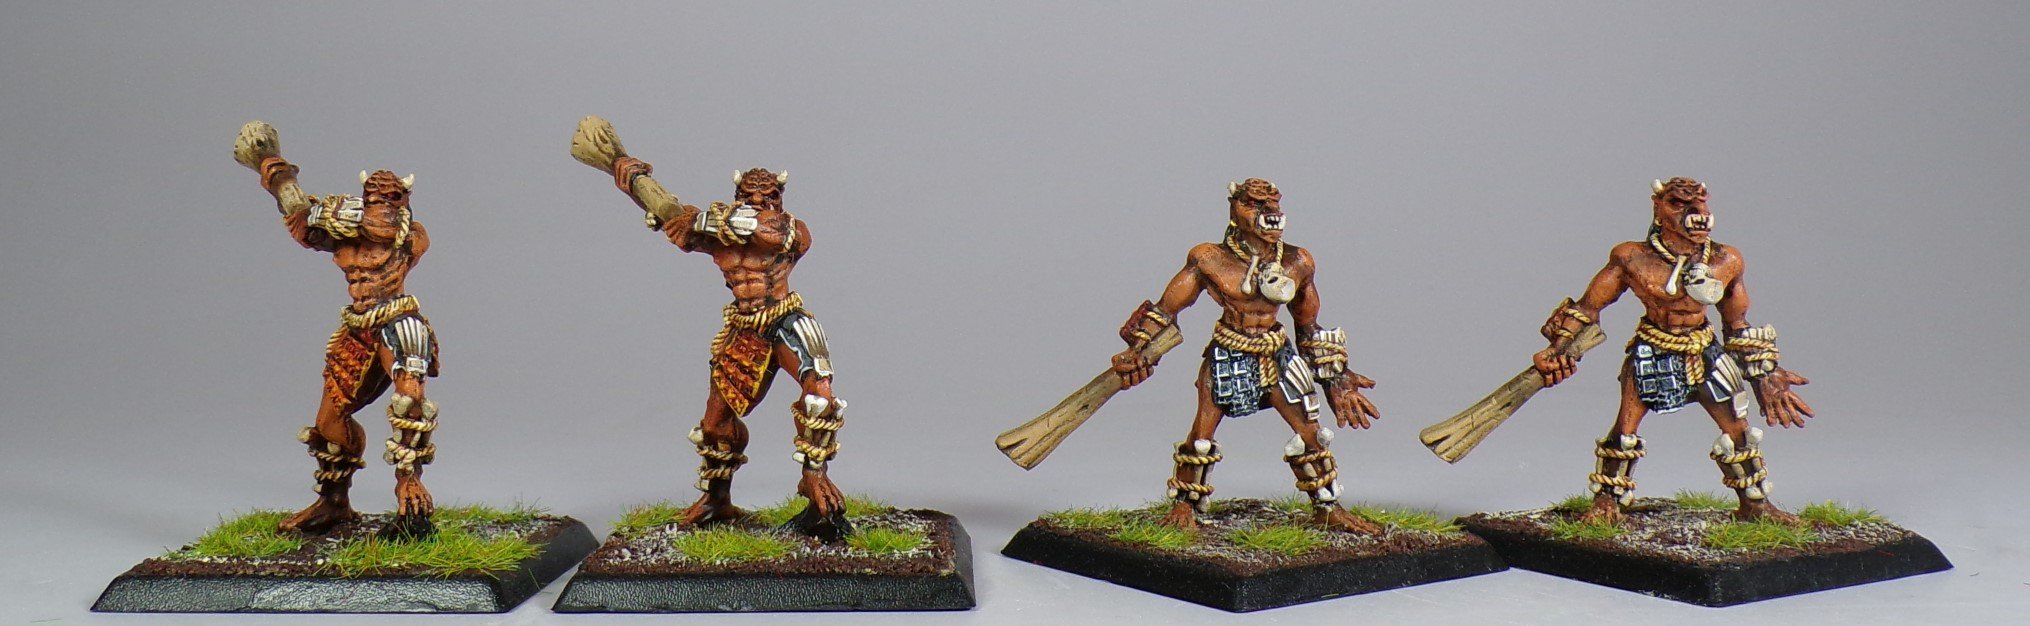 L5R Legend of the Five Rings Miniature Painting Service Paintedfigs (32).jpg